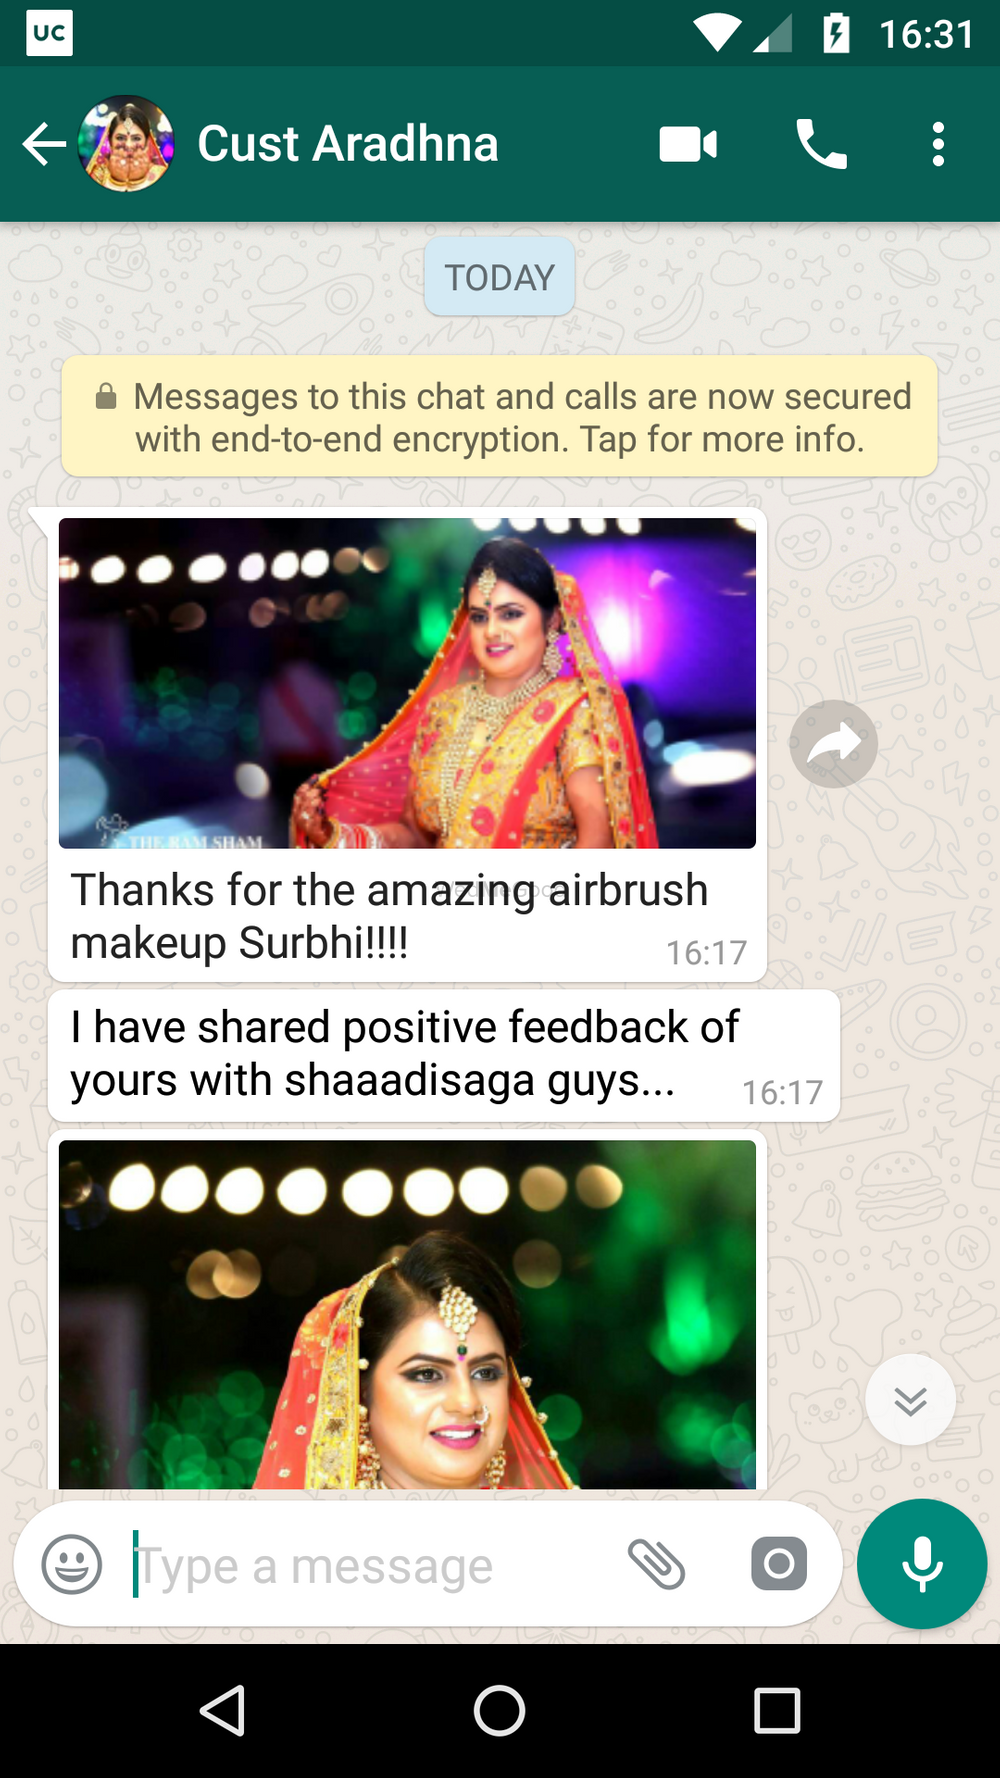 Photo From reviews by clients - By Surbhi Make Up Artist